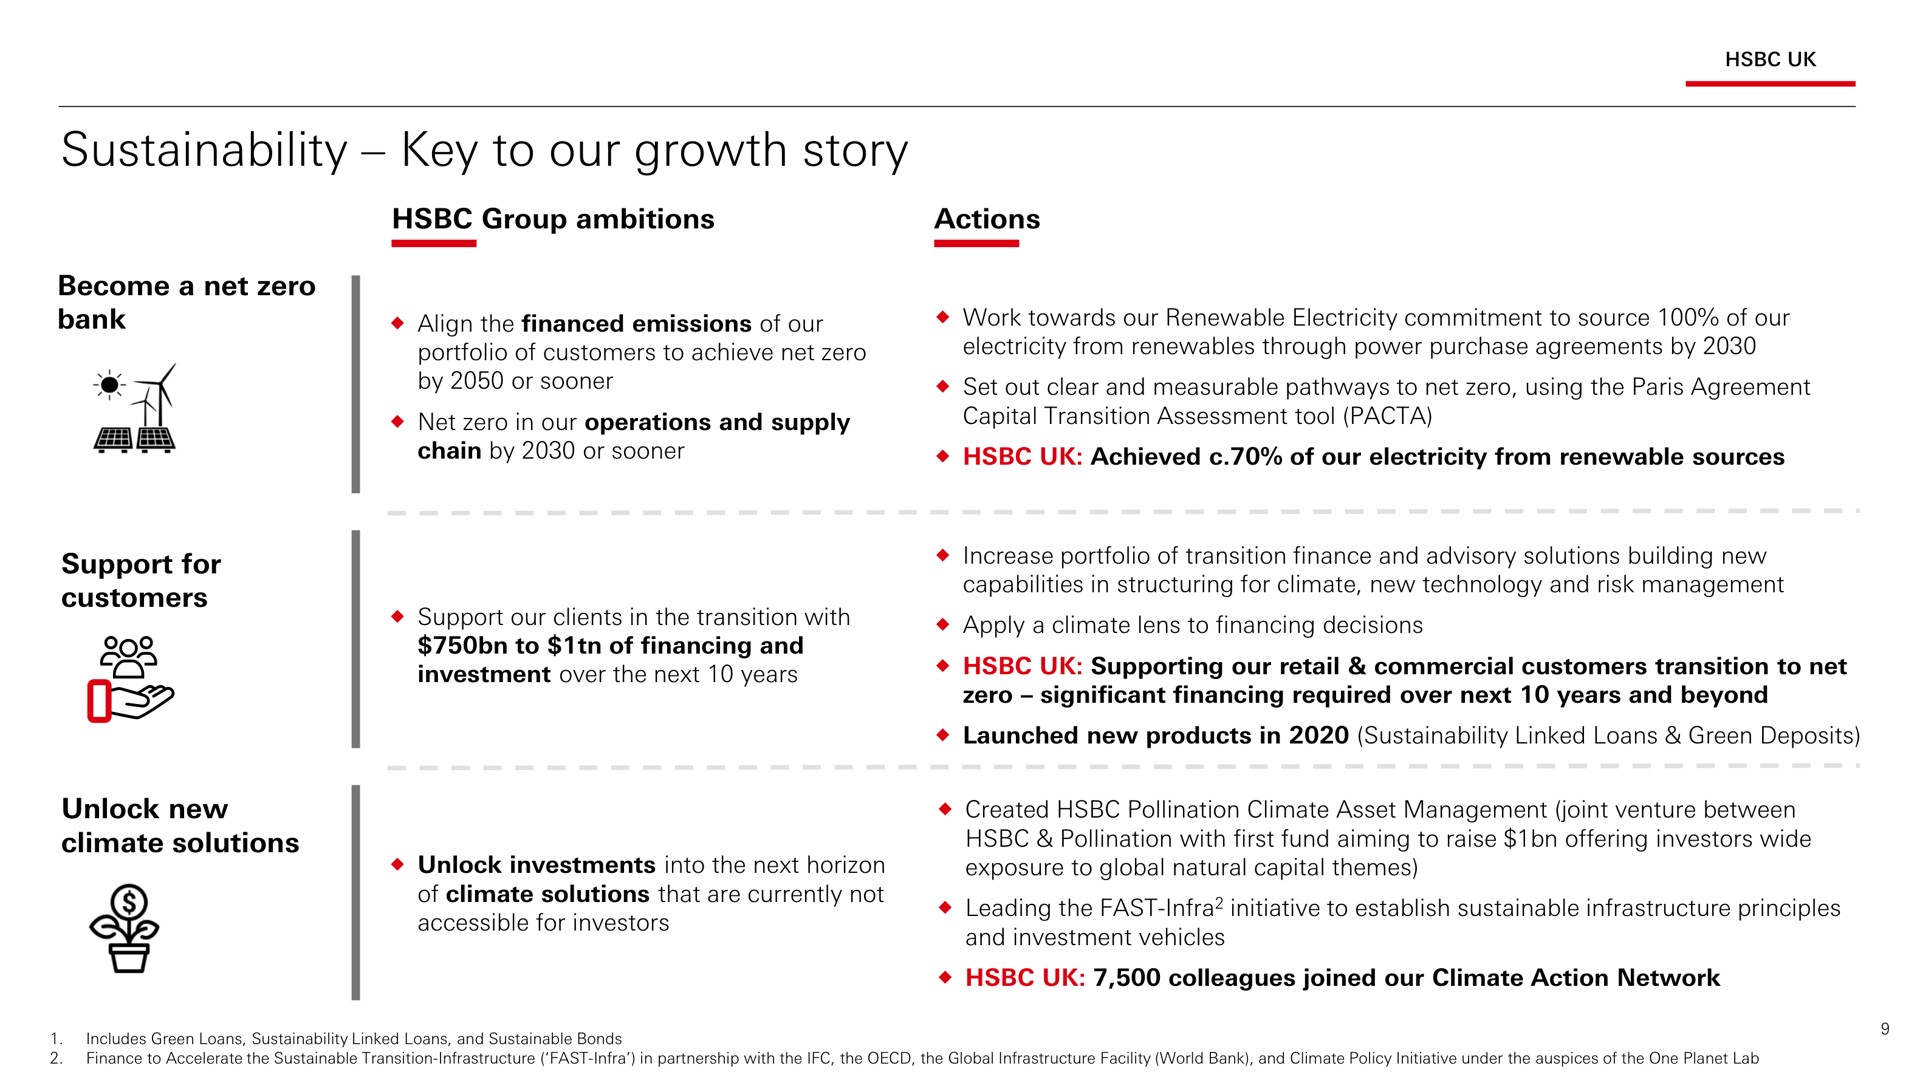 key to our growth story | HSBC